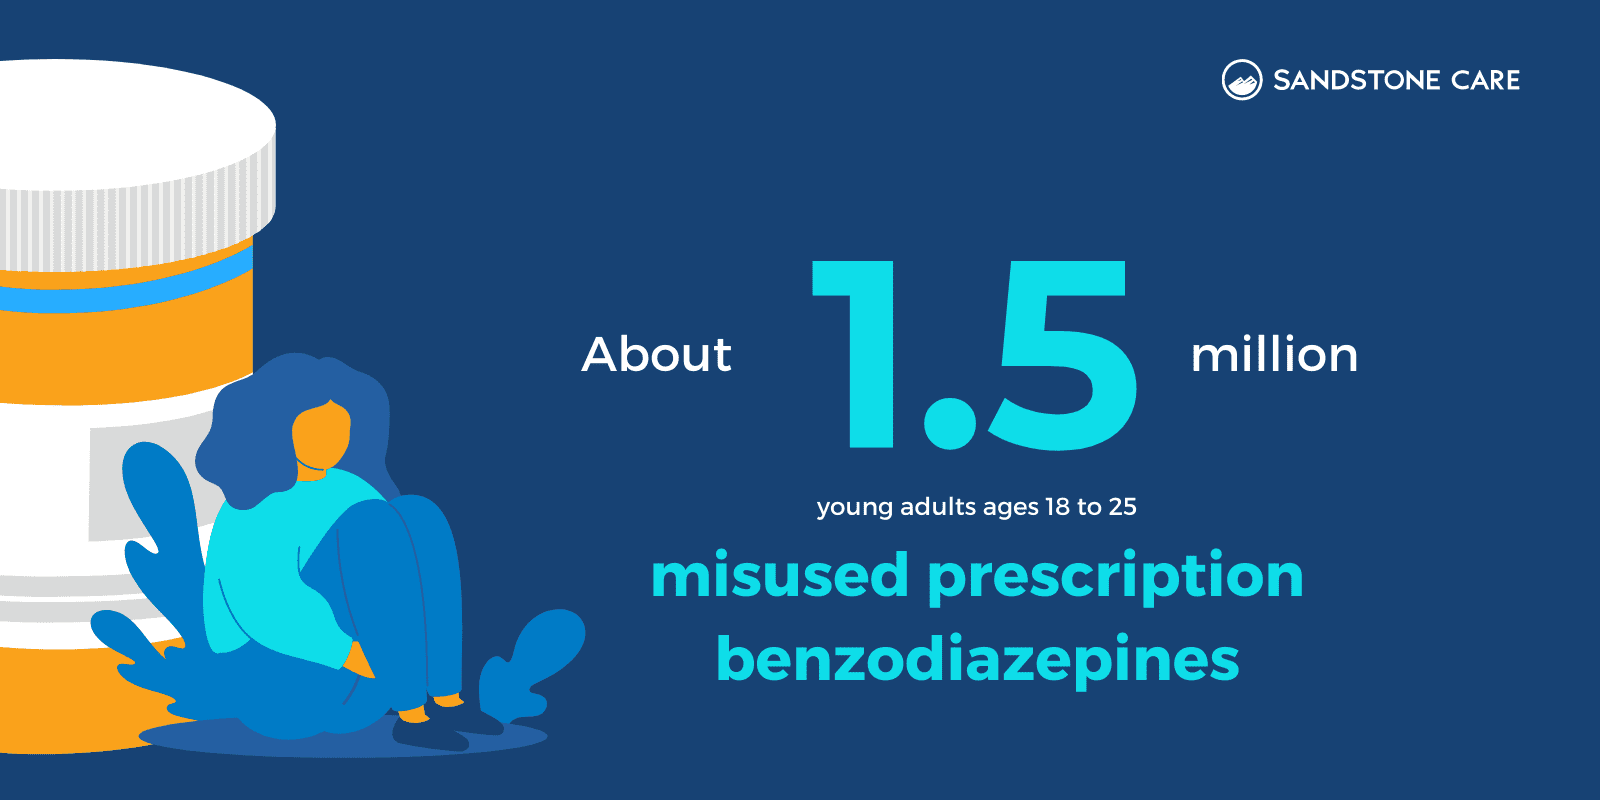 About 1.5 million young adults ages 18 to 25 missed prescription benzodiazepines next to a girl sitting down next to an orange prescription pill bottle